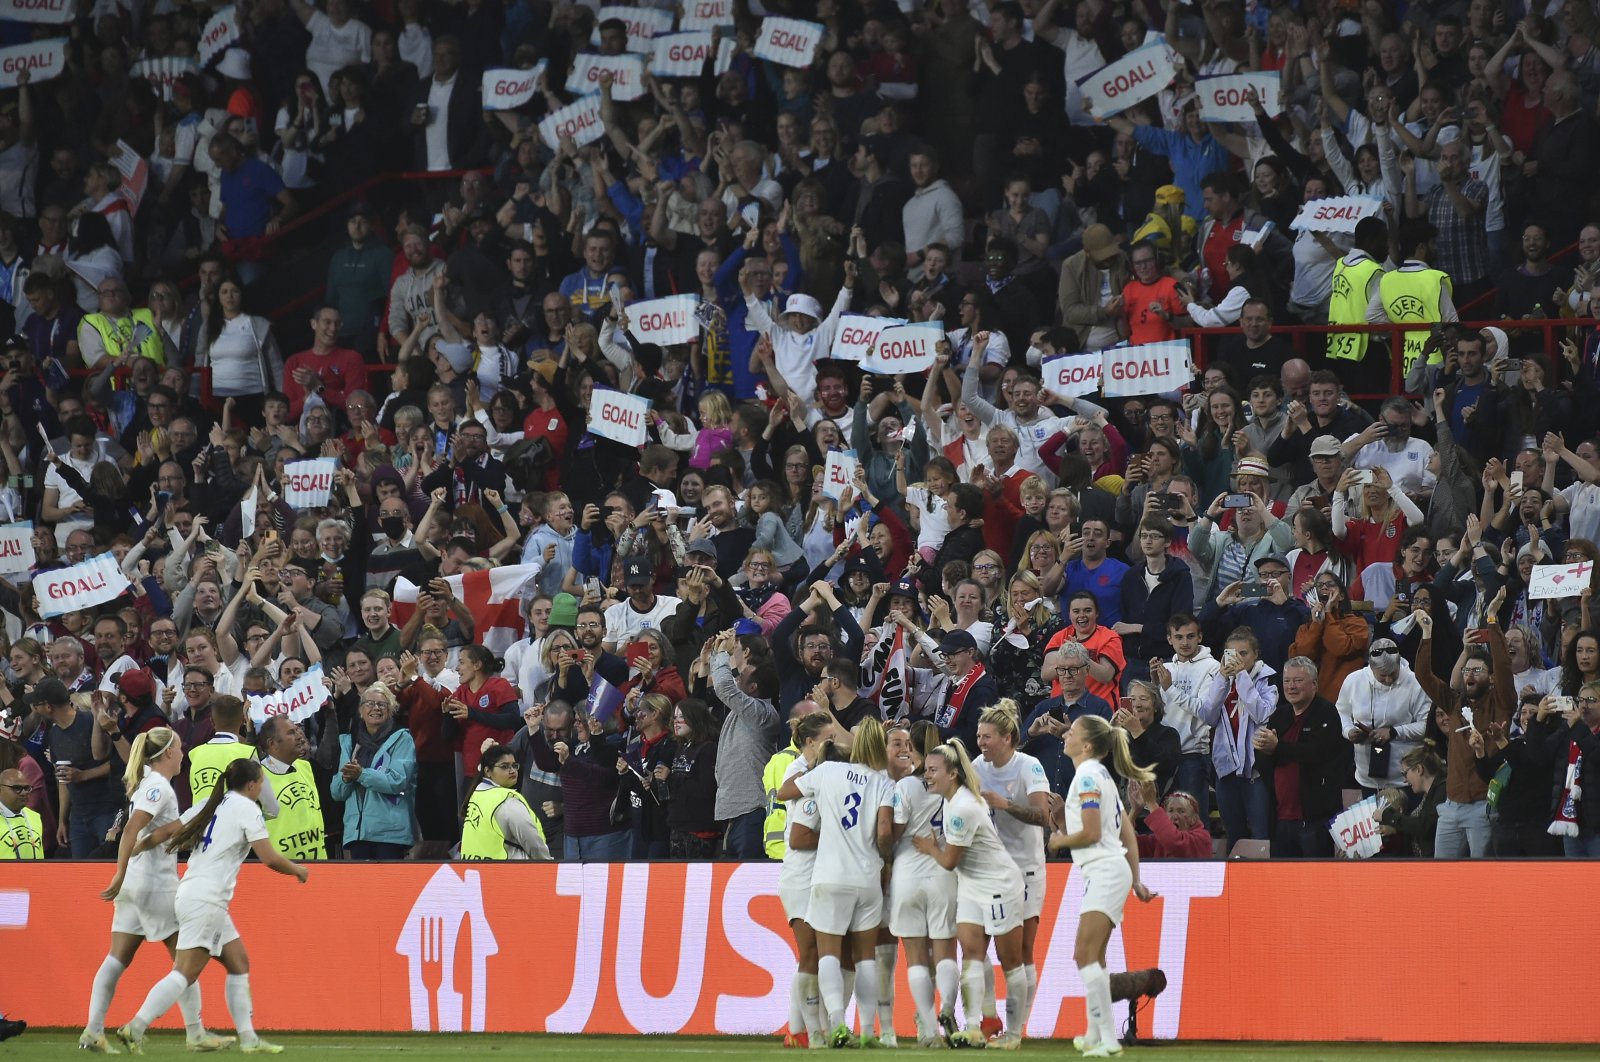 England&#039;s players celebrate after scoring against Sweden, in Sheffield, England, Jul. 26, 2022. (AP PHOTO) 